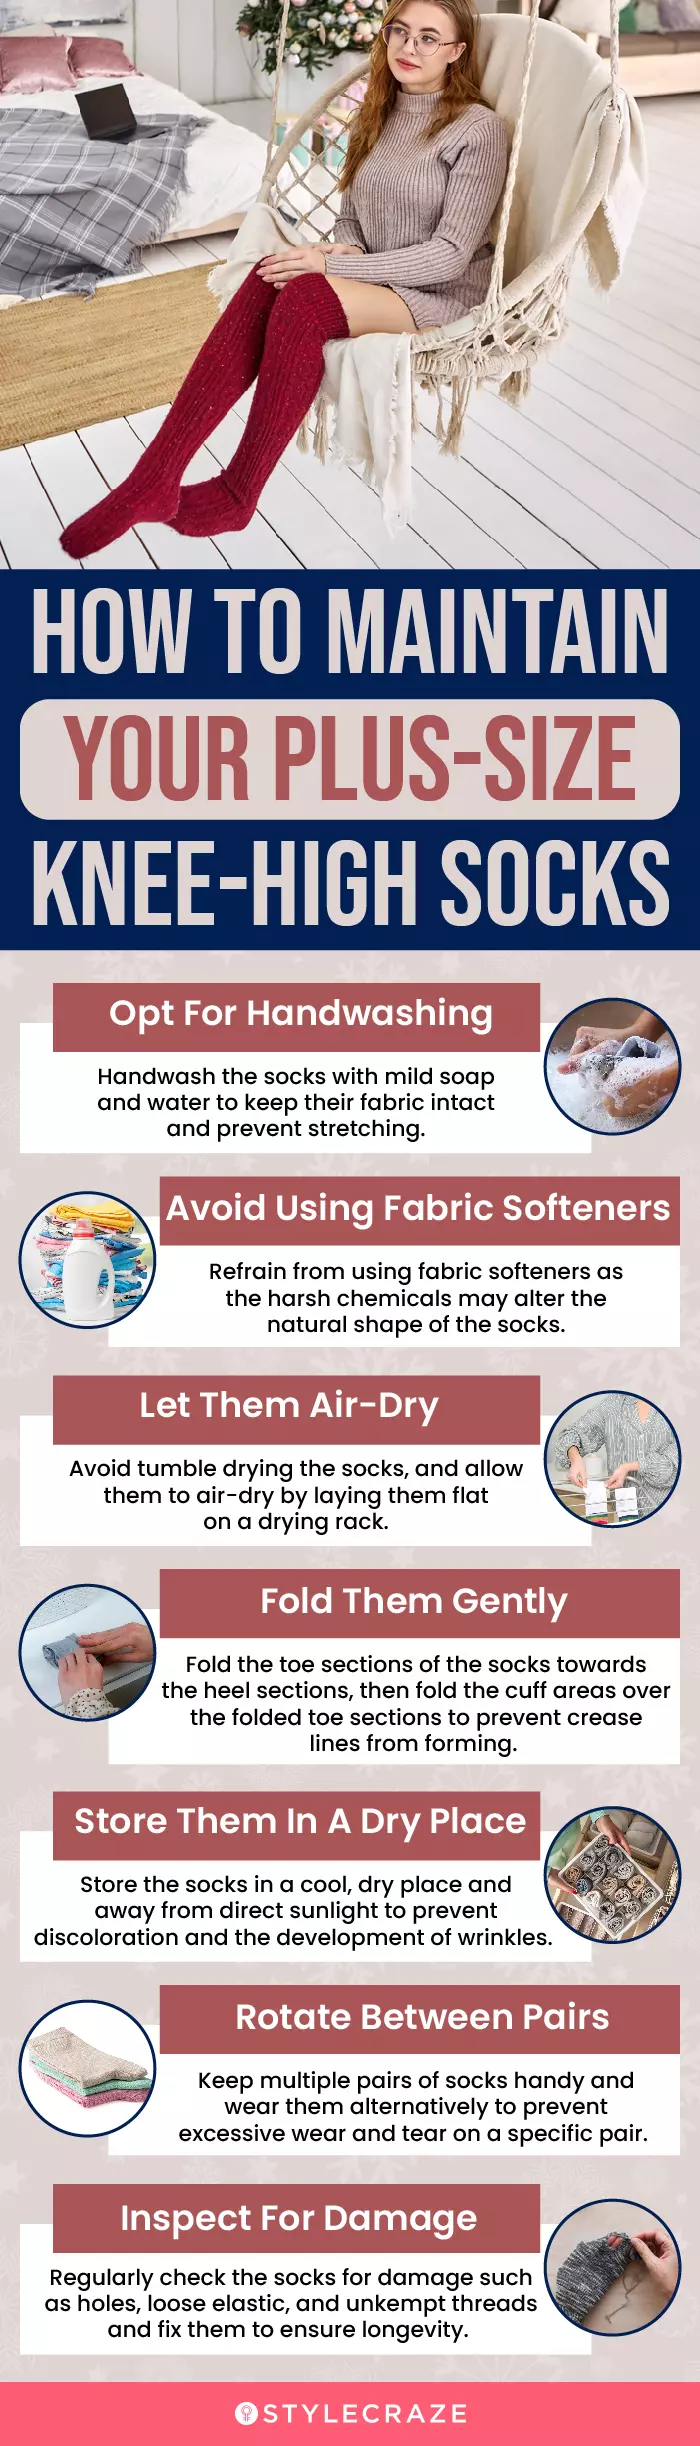 How To Maintain Your Plus-Size Knee-High Socks (infographic)